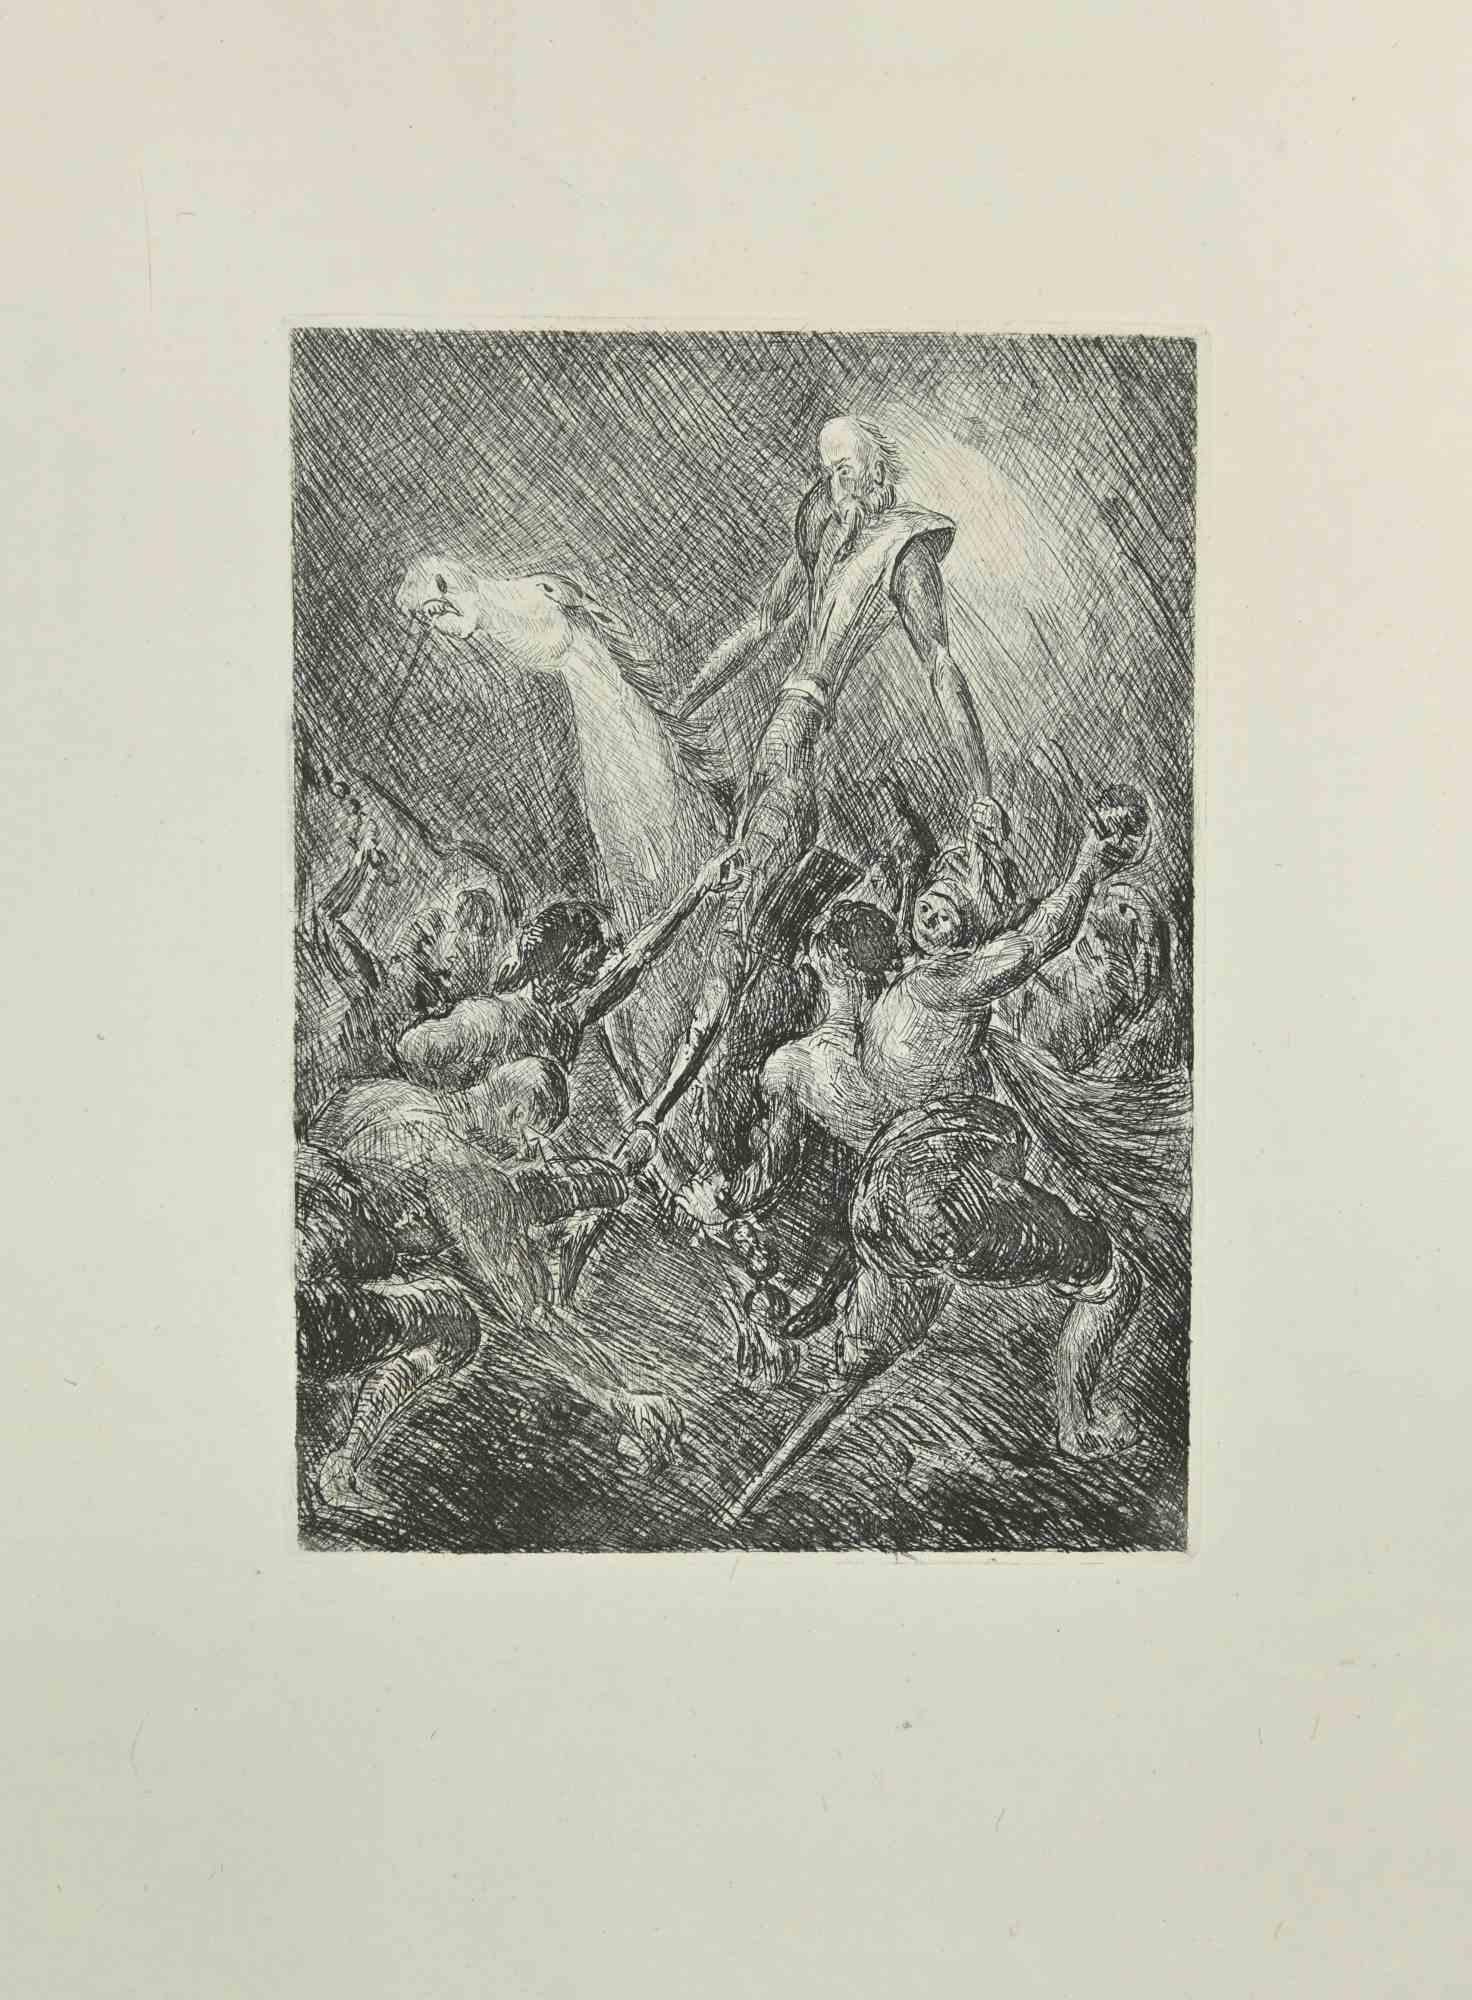 Don Quixote Surrounded is an etching and drypoint print on ivory-colored China paper, realized by Wladyslaw Jahl in 1951.

It belongs to a limited edition of 125 specimens.

Good conditions.

The artwork represents a visual scene from Don Quixote